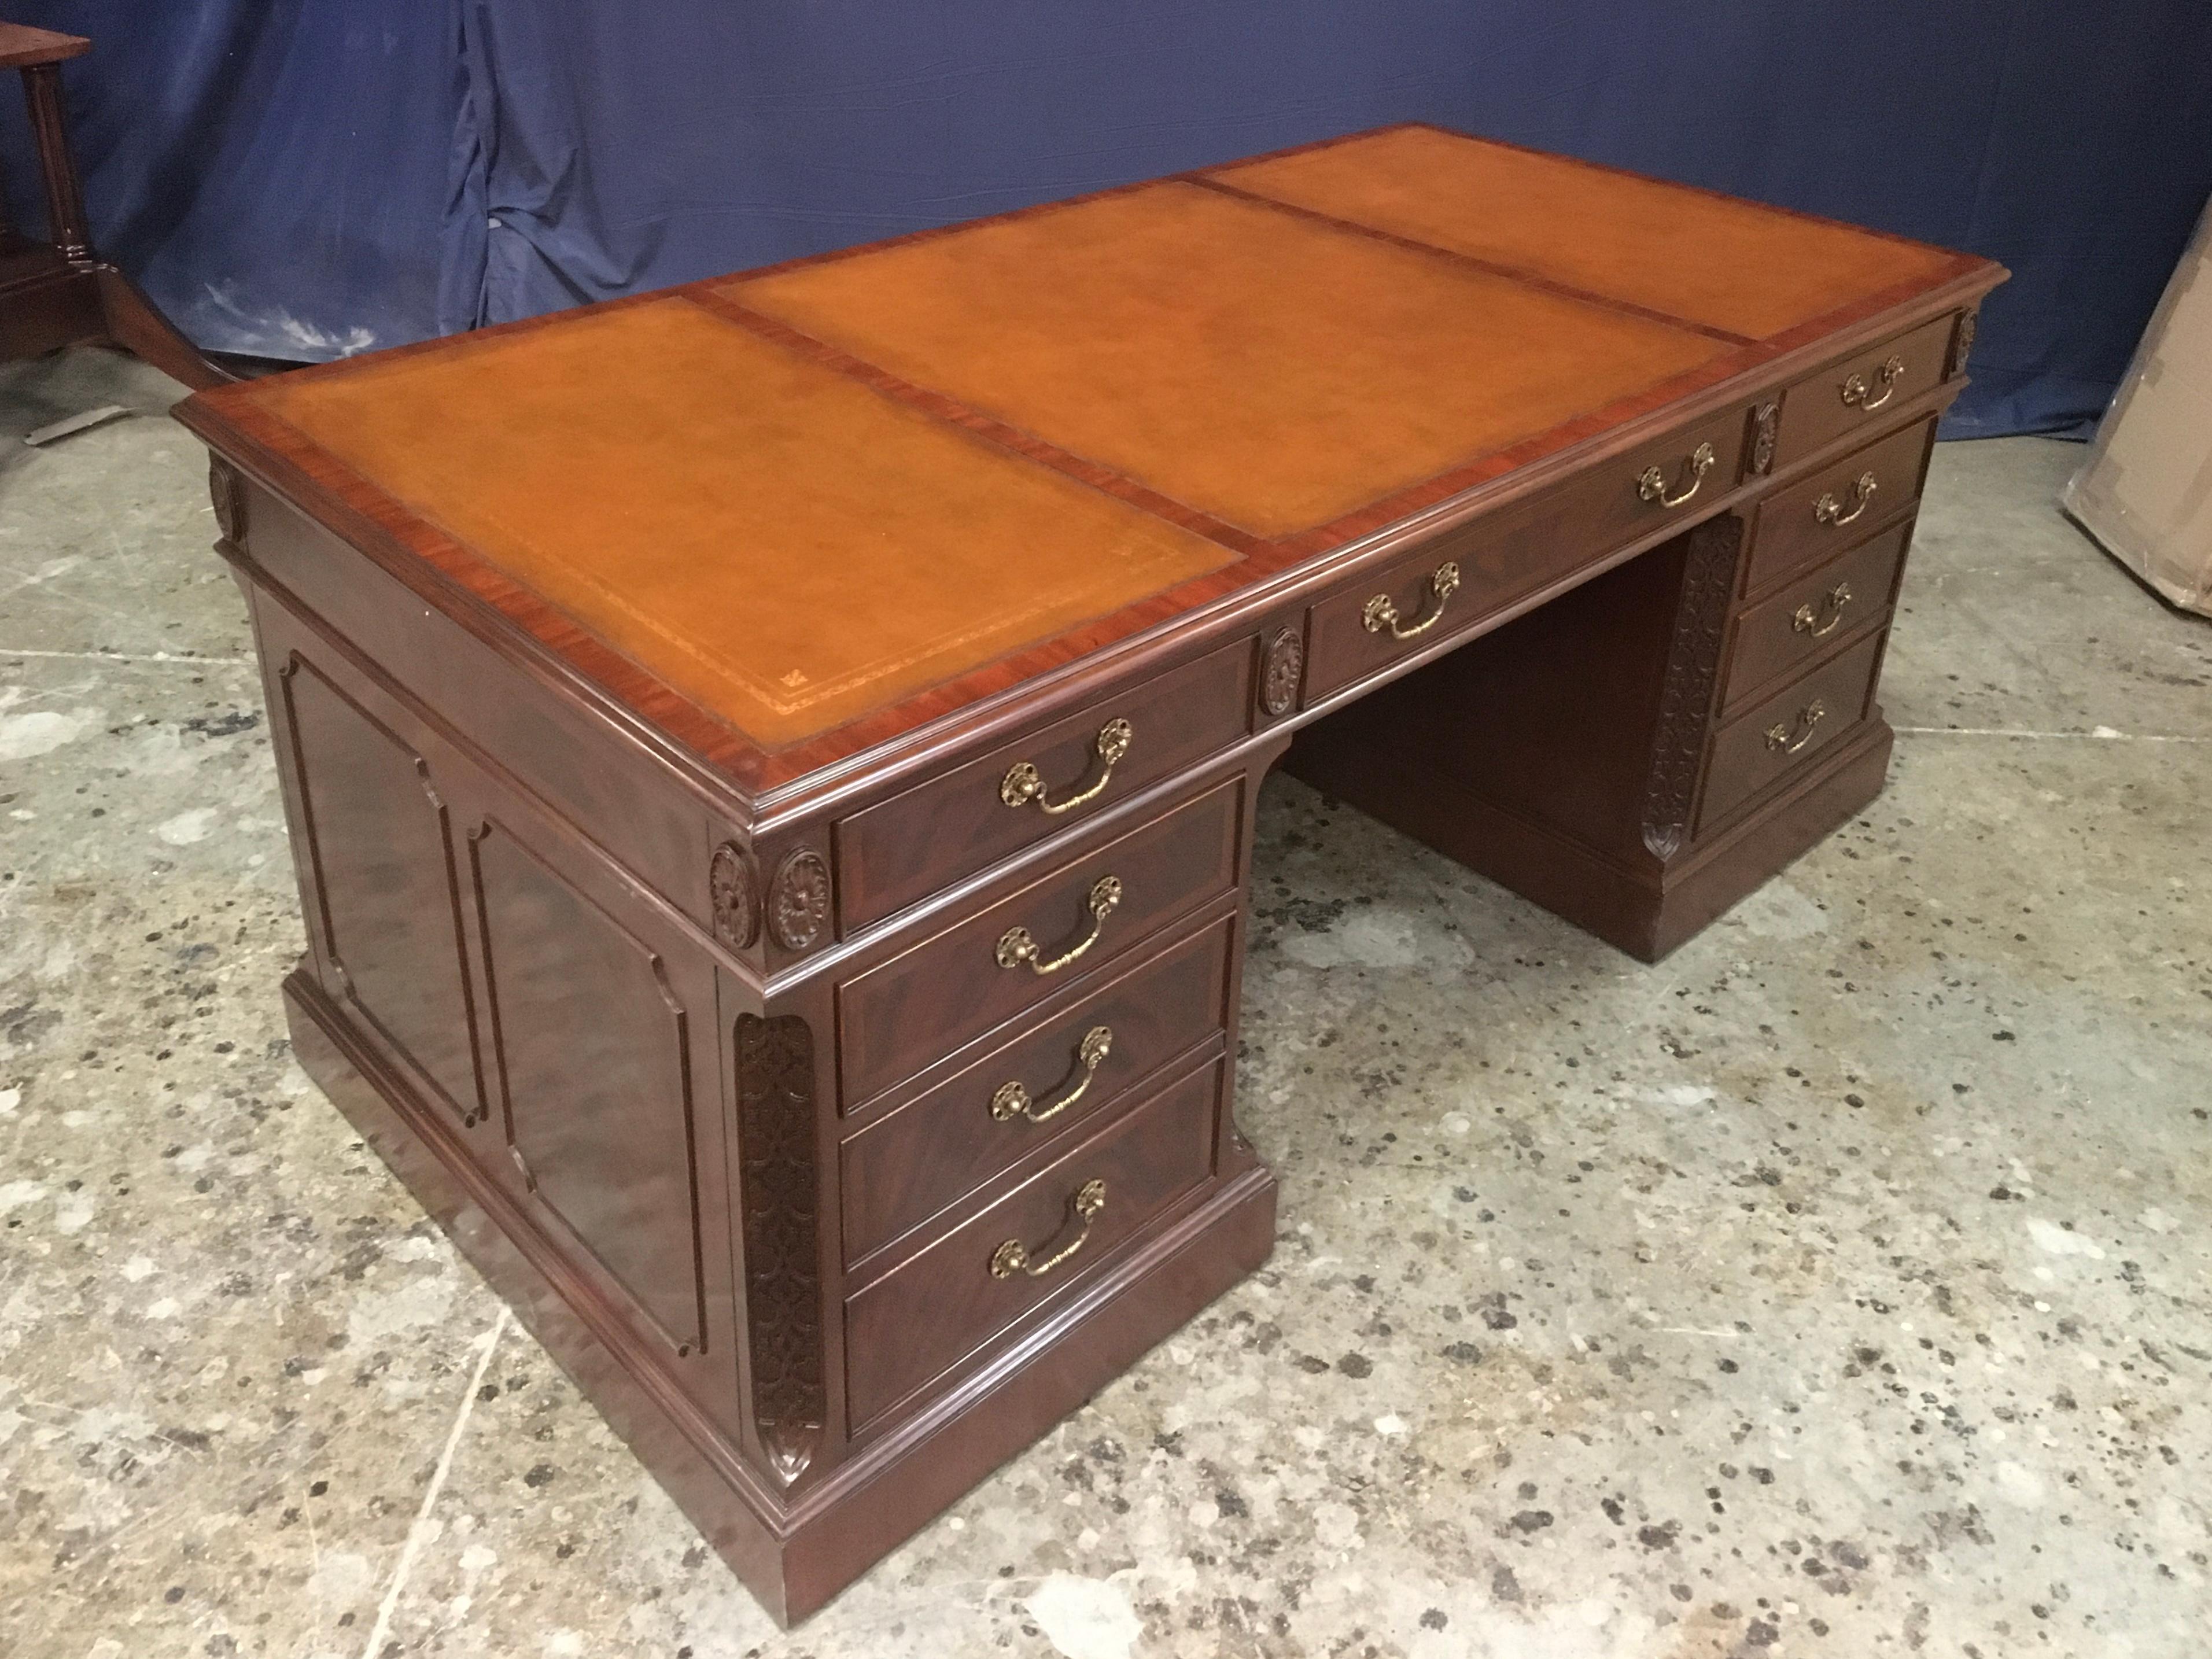 Regency Traditional 72 Inch Mahogany Executive Desk by Leighton Hall For Sale